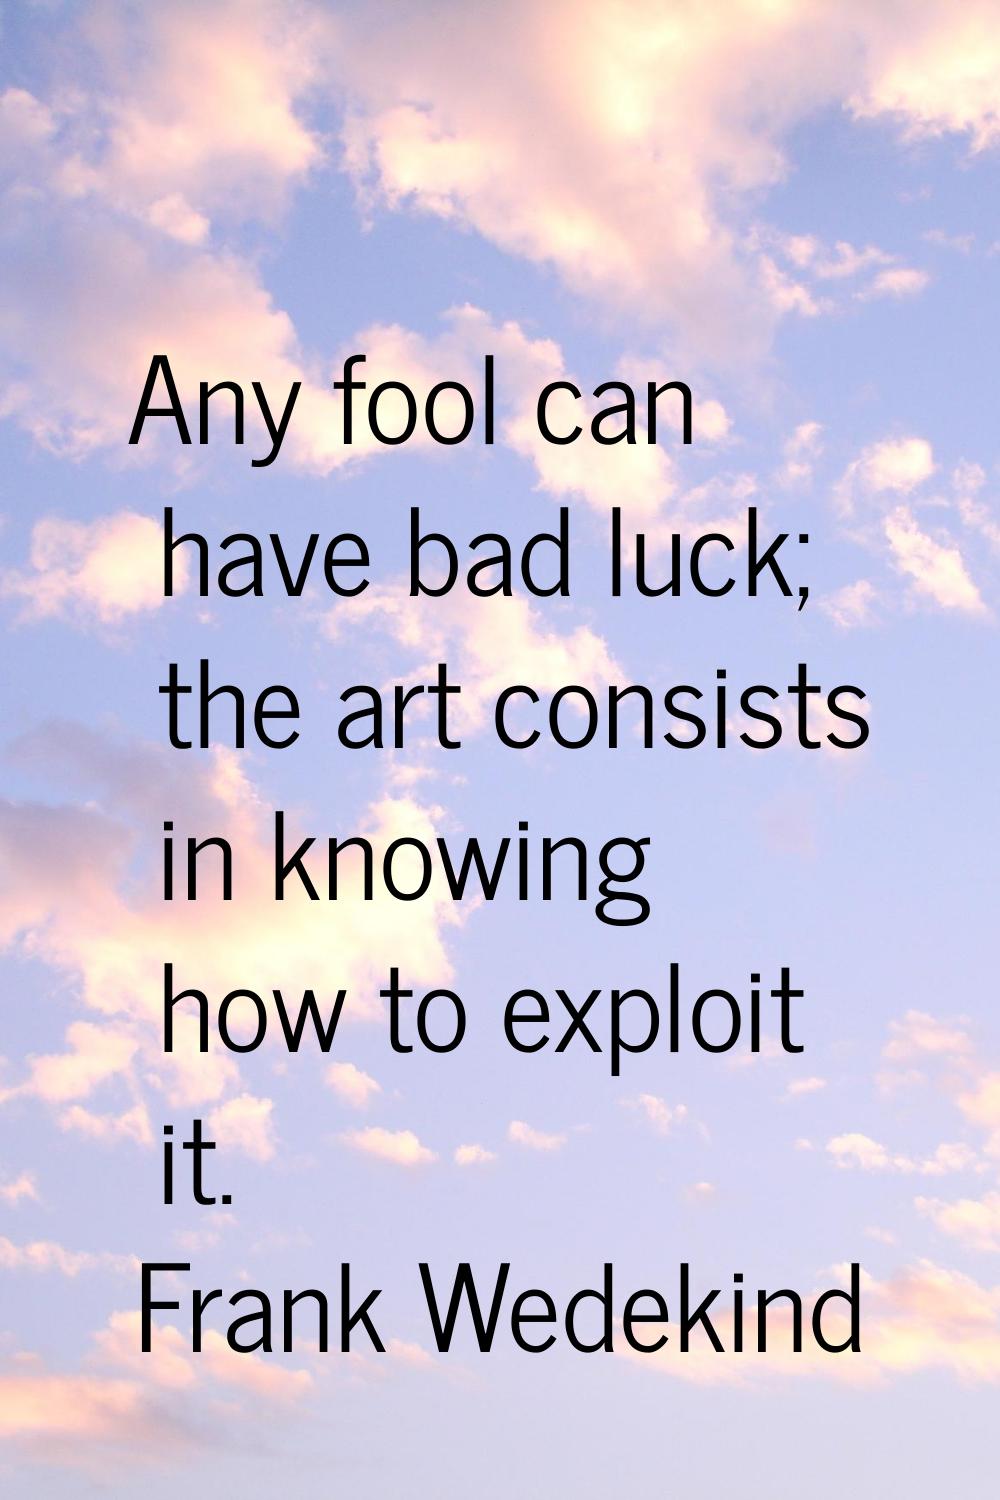 Any fool can have bad luck; the art consists in knowing how to exploit it.